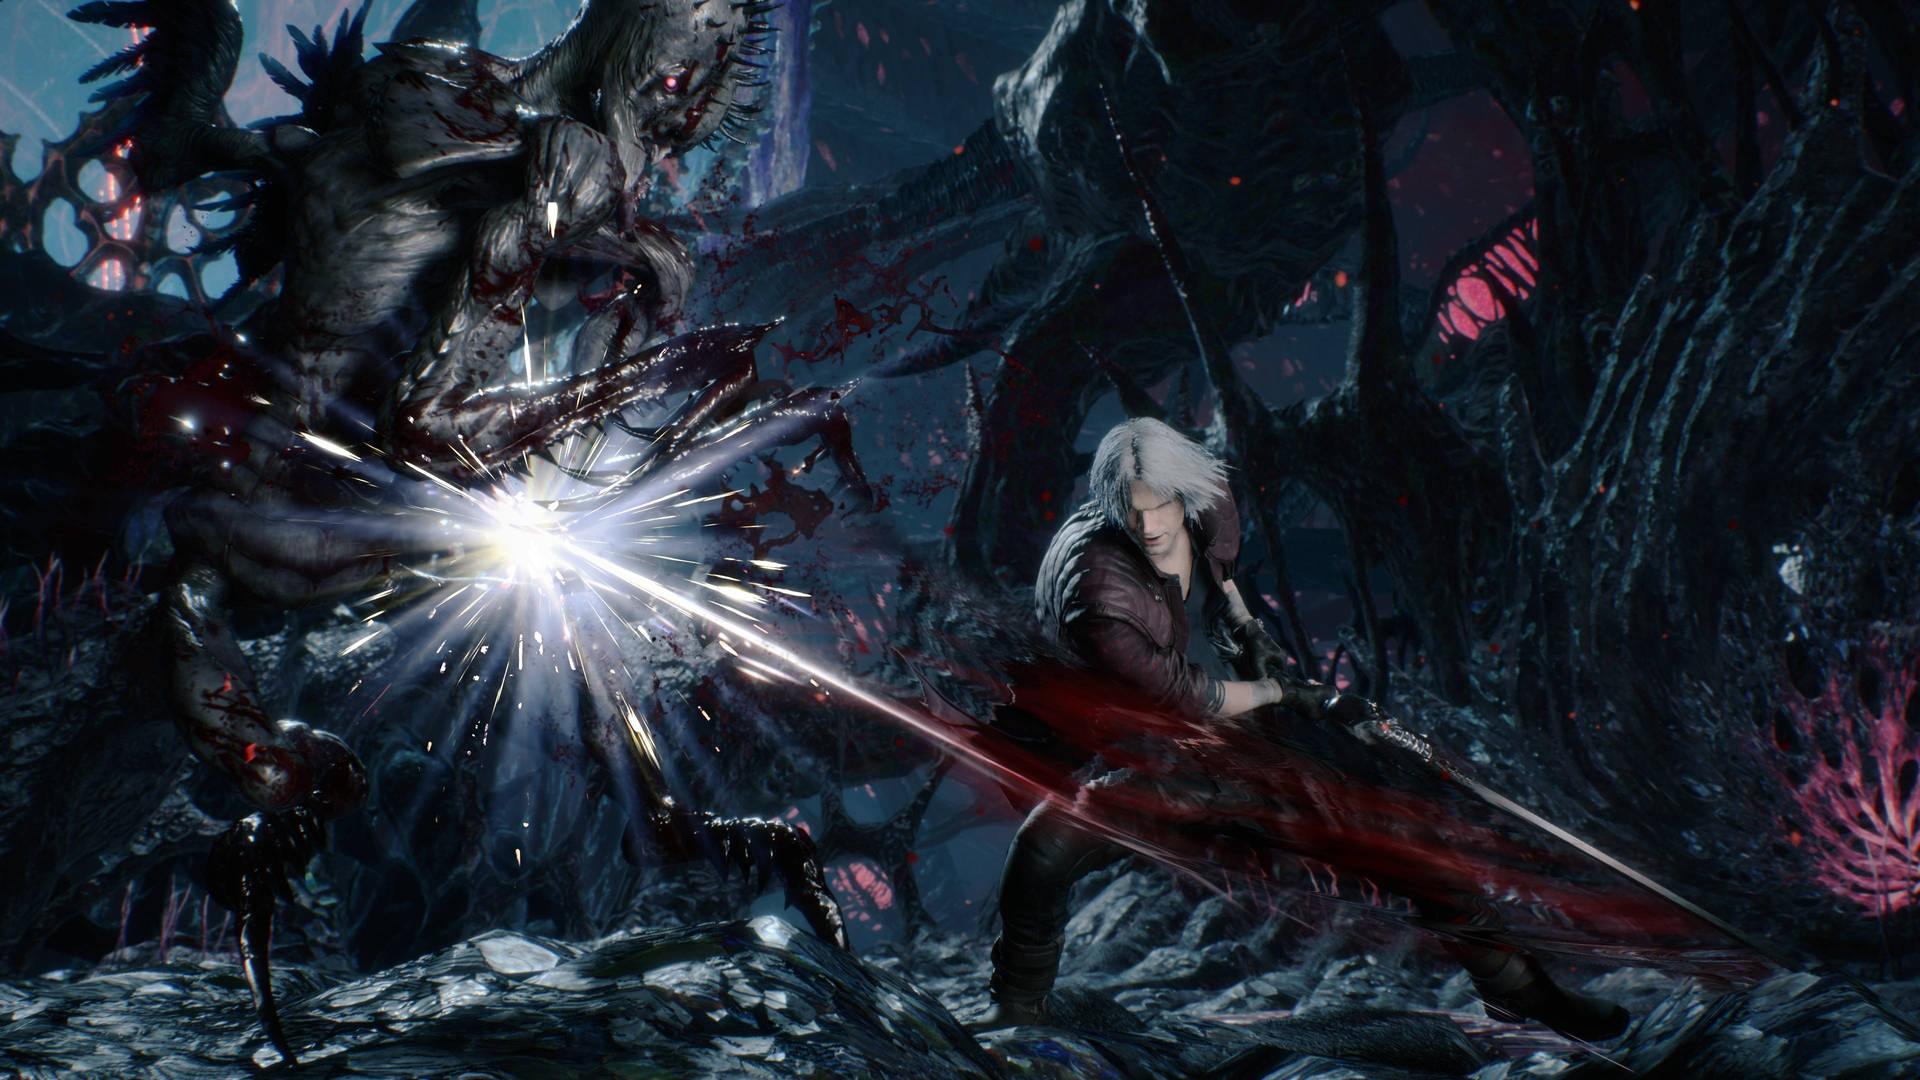 Dante using the Devil Sword Sparda to fight off the demons in Devil May Cry 5. Wallpaper